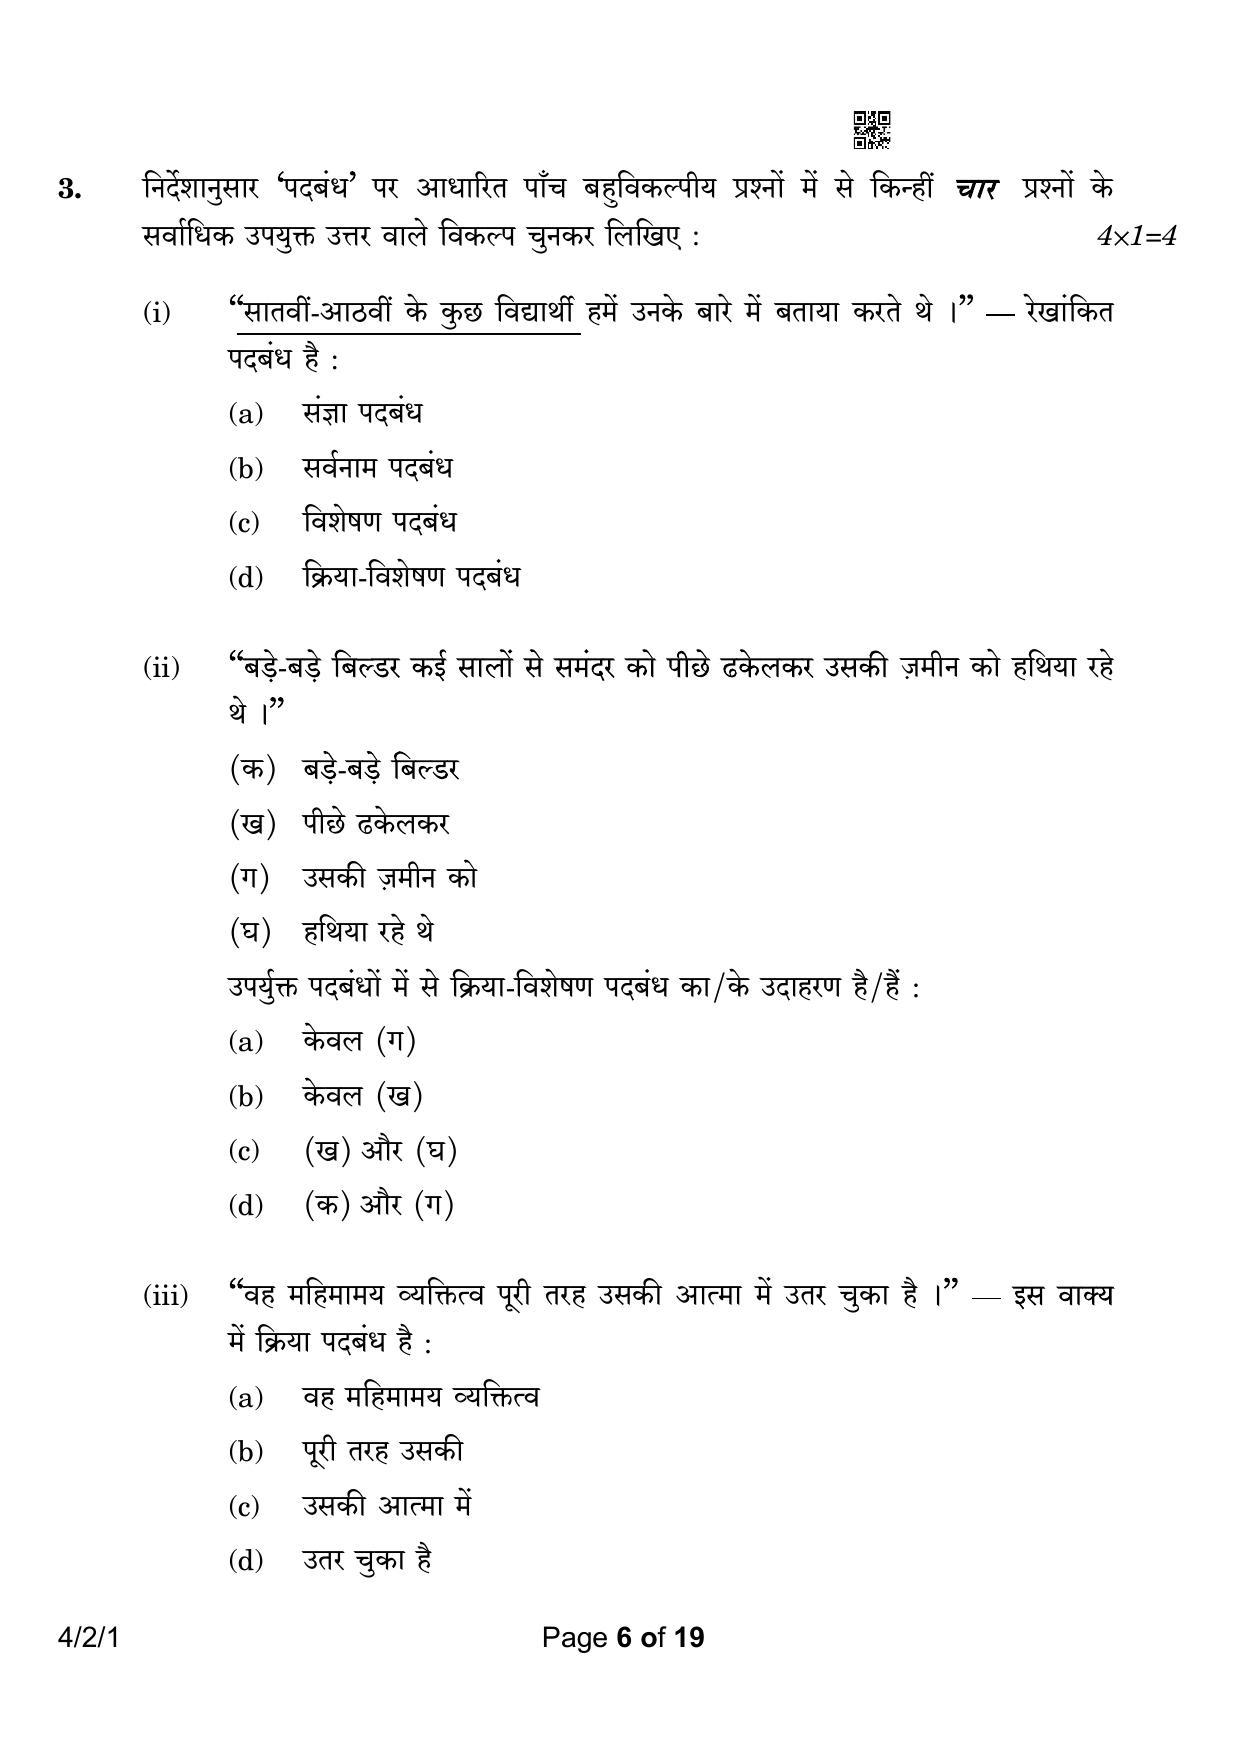 CBSE Class 10 4-2-1 Hindi B 2023 Question Paper - Page 6